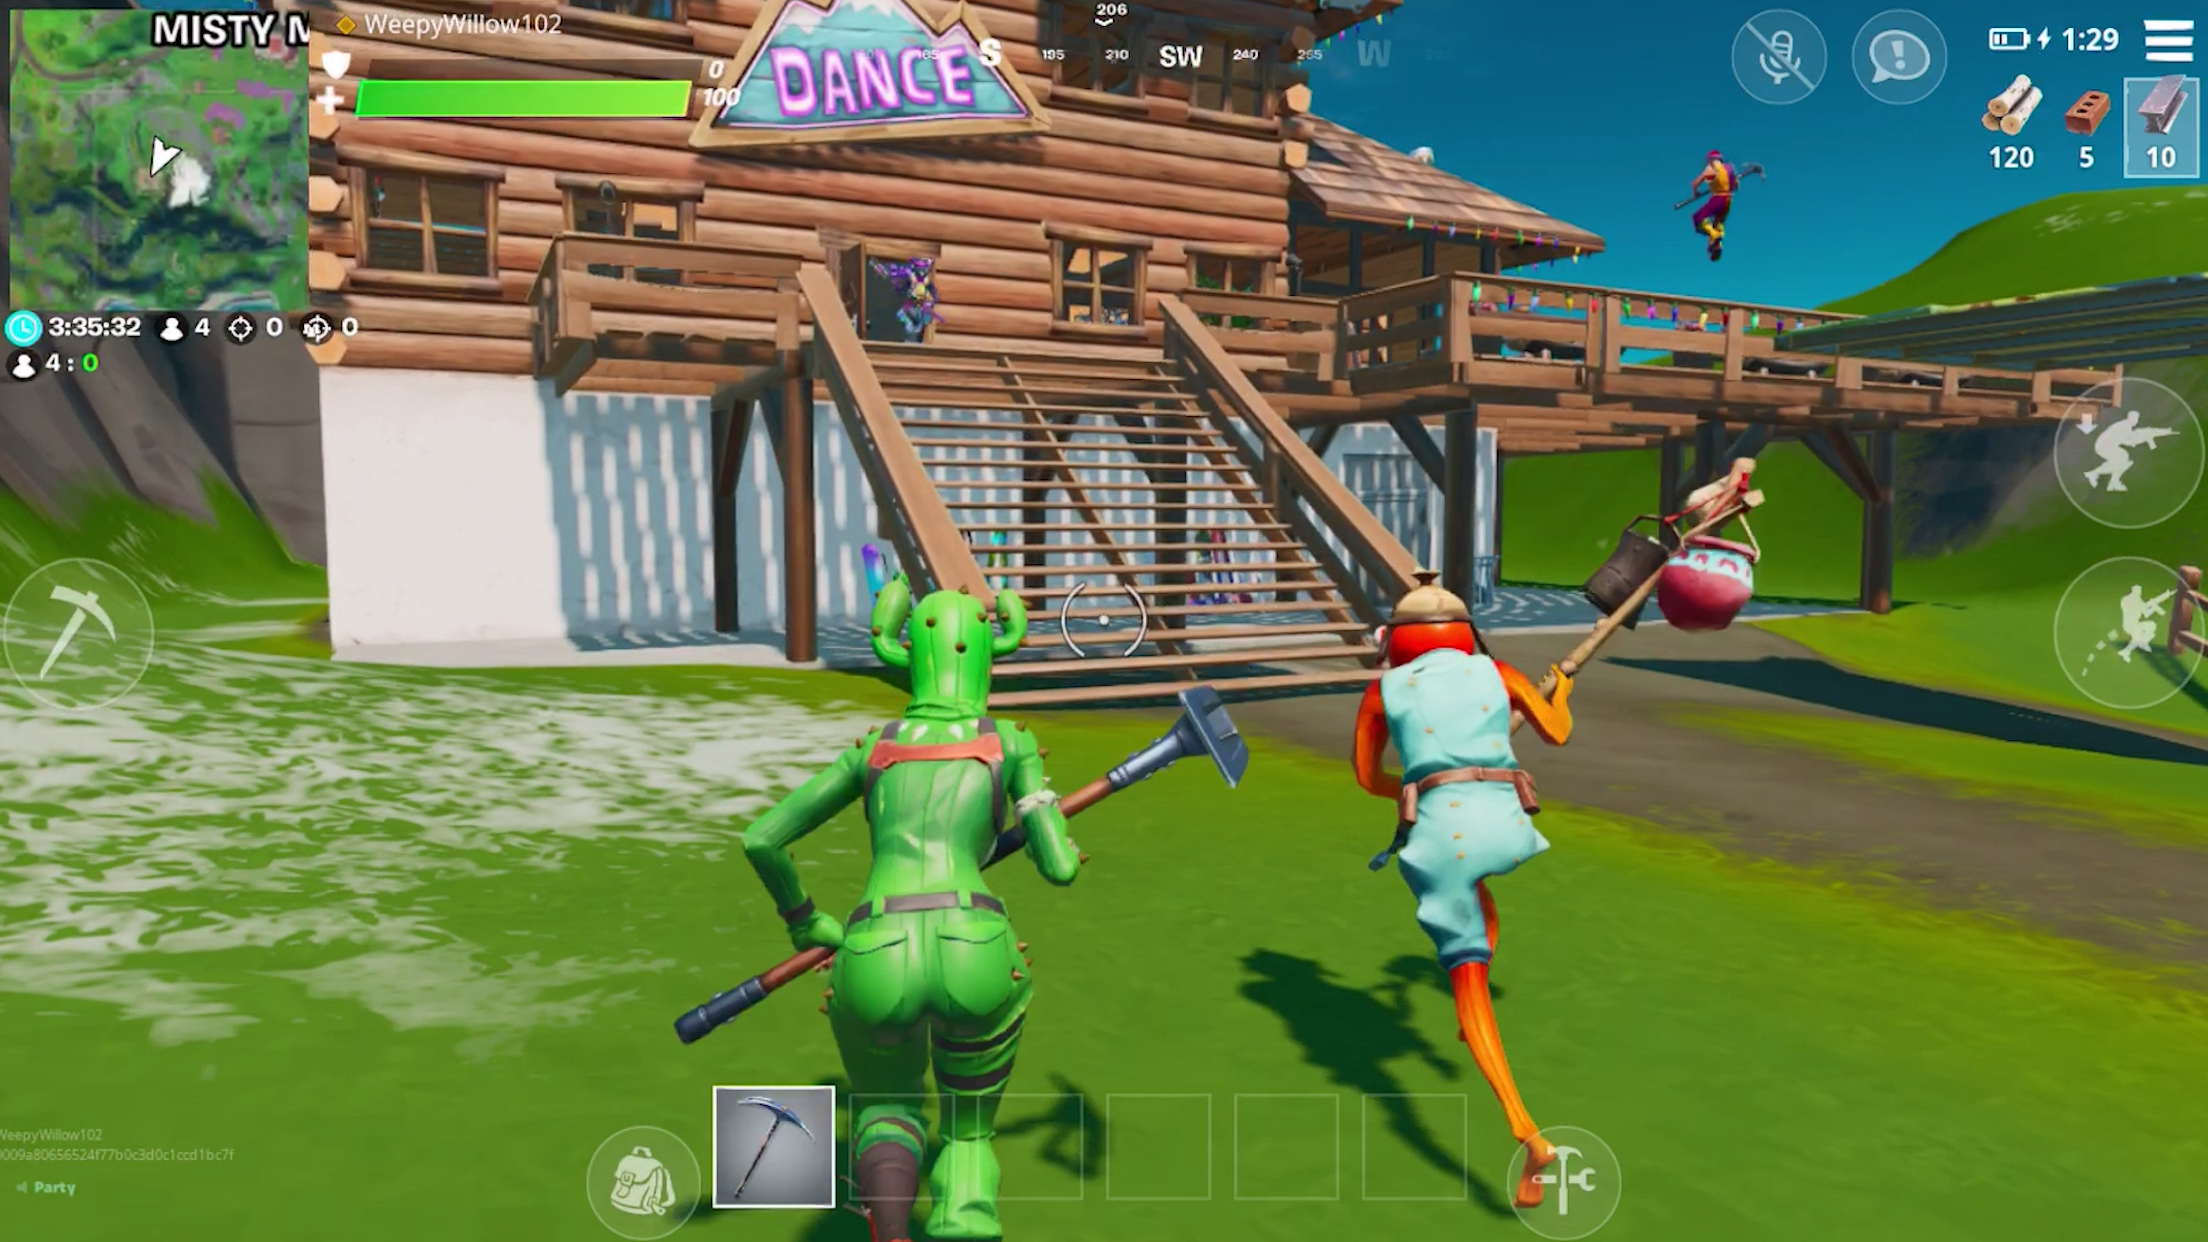 Fortnite APK 24.20.0-24939793-Android for Android – Download Fortnite APK  Latest Version from APKFab.com